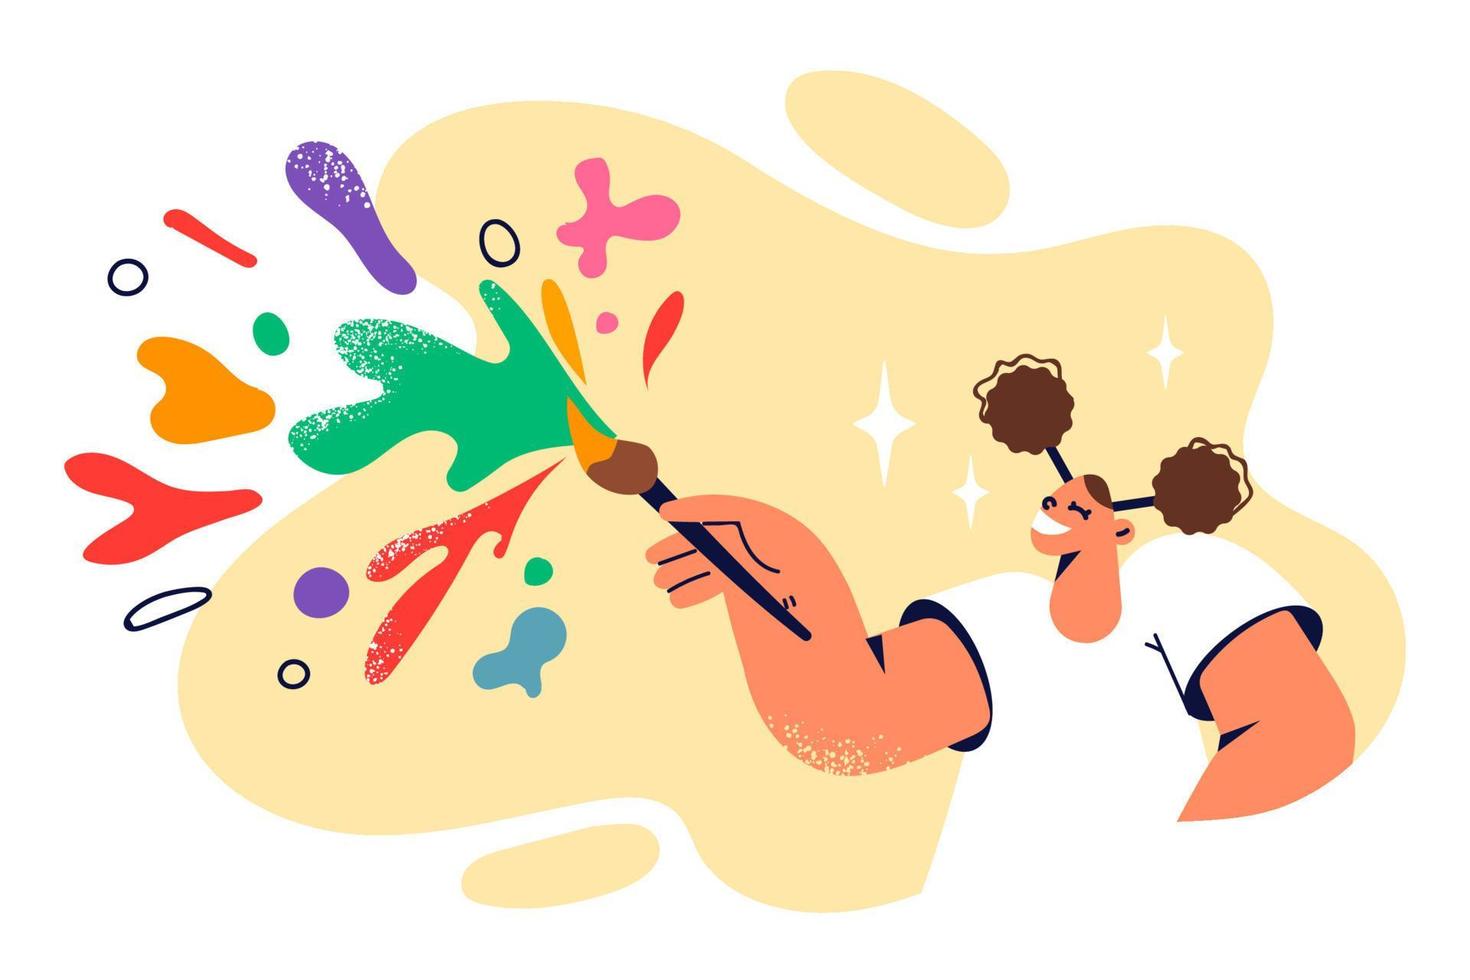 Funny teenage girl wants to become artist uses brush to paint. Schoolgirl with pigtails with brush and colorful splashes flying in different directions symbolizes development creativity in children vector